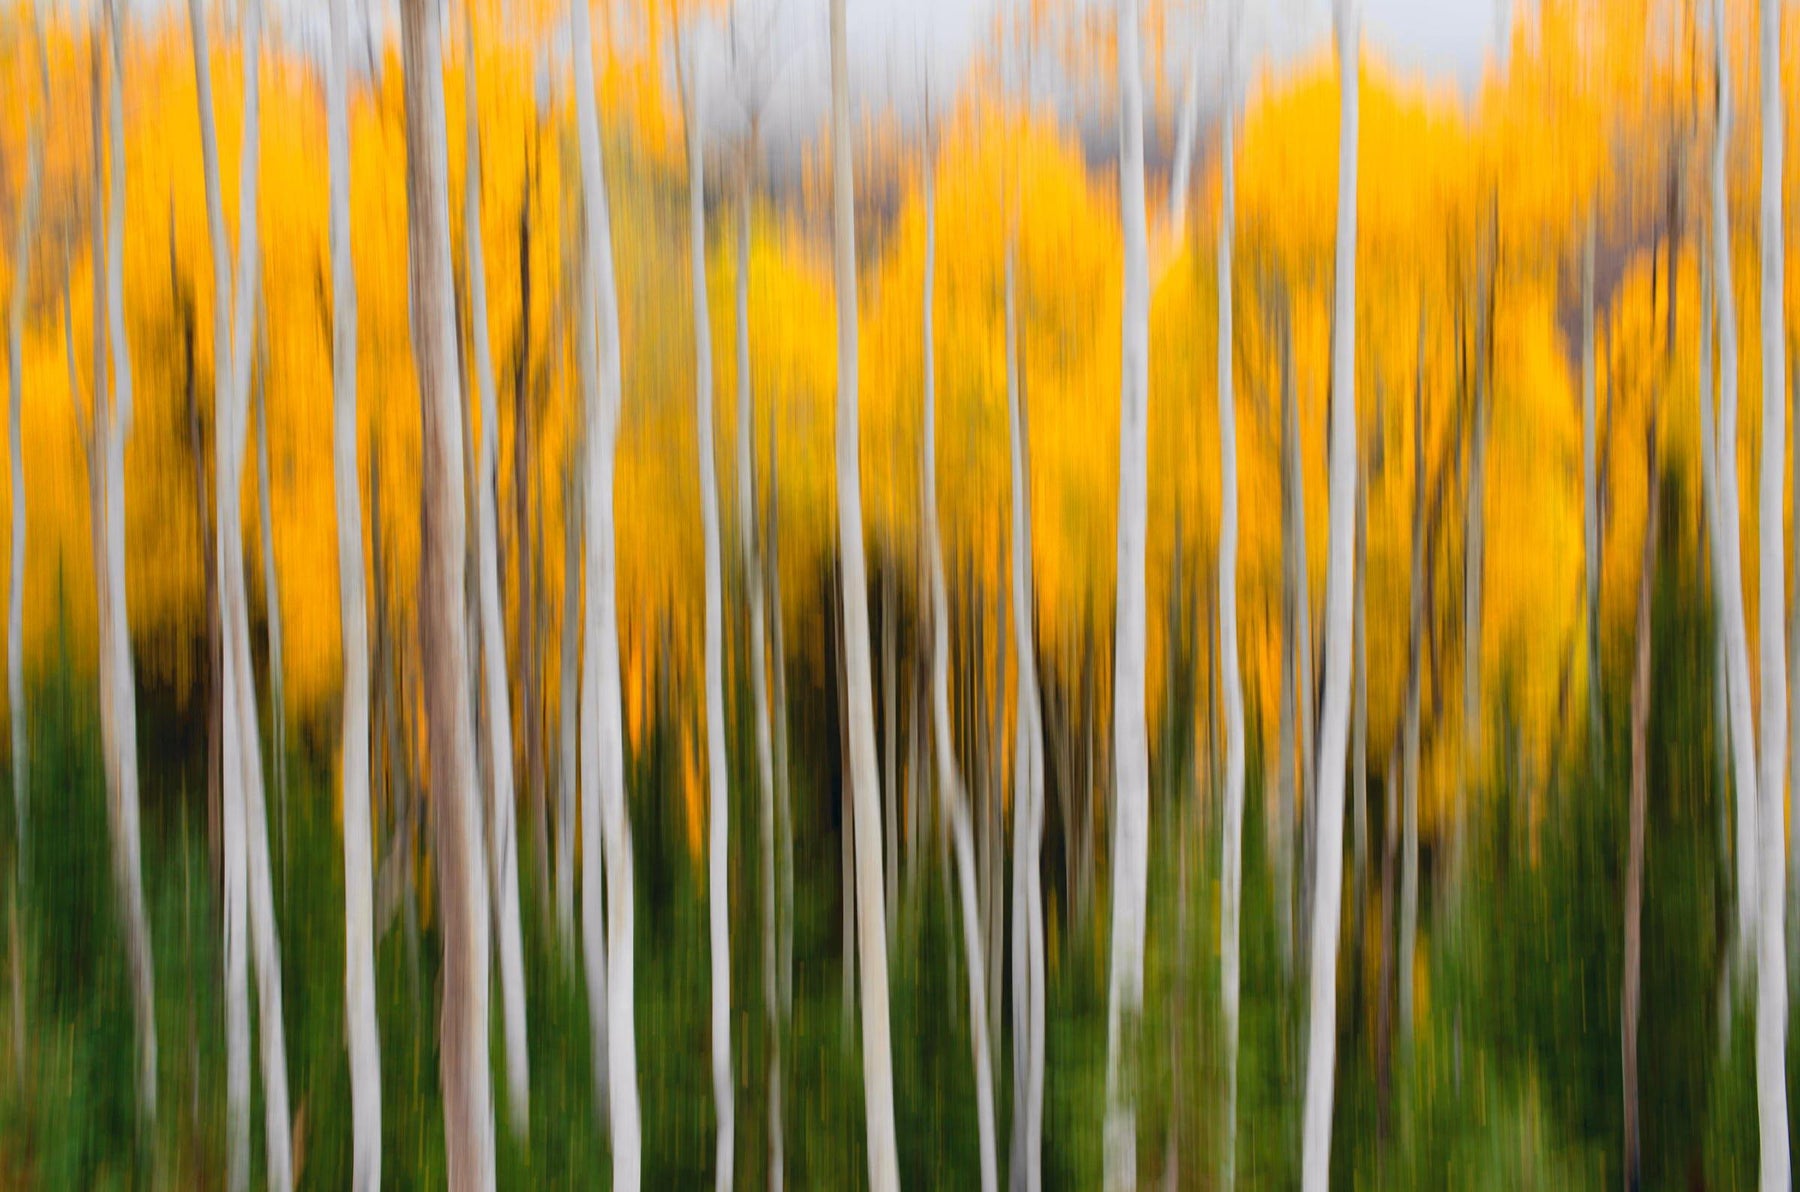 Blurred yellow and white forest with green grass foreground in Aspen Colorado